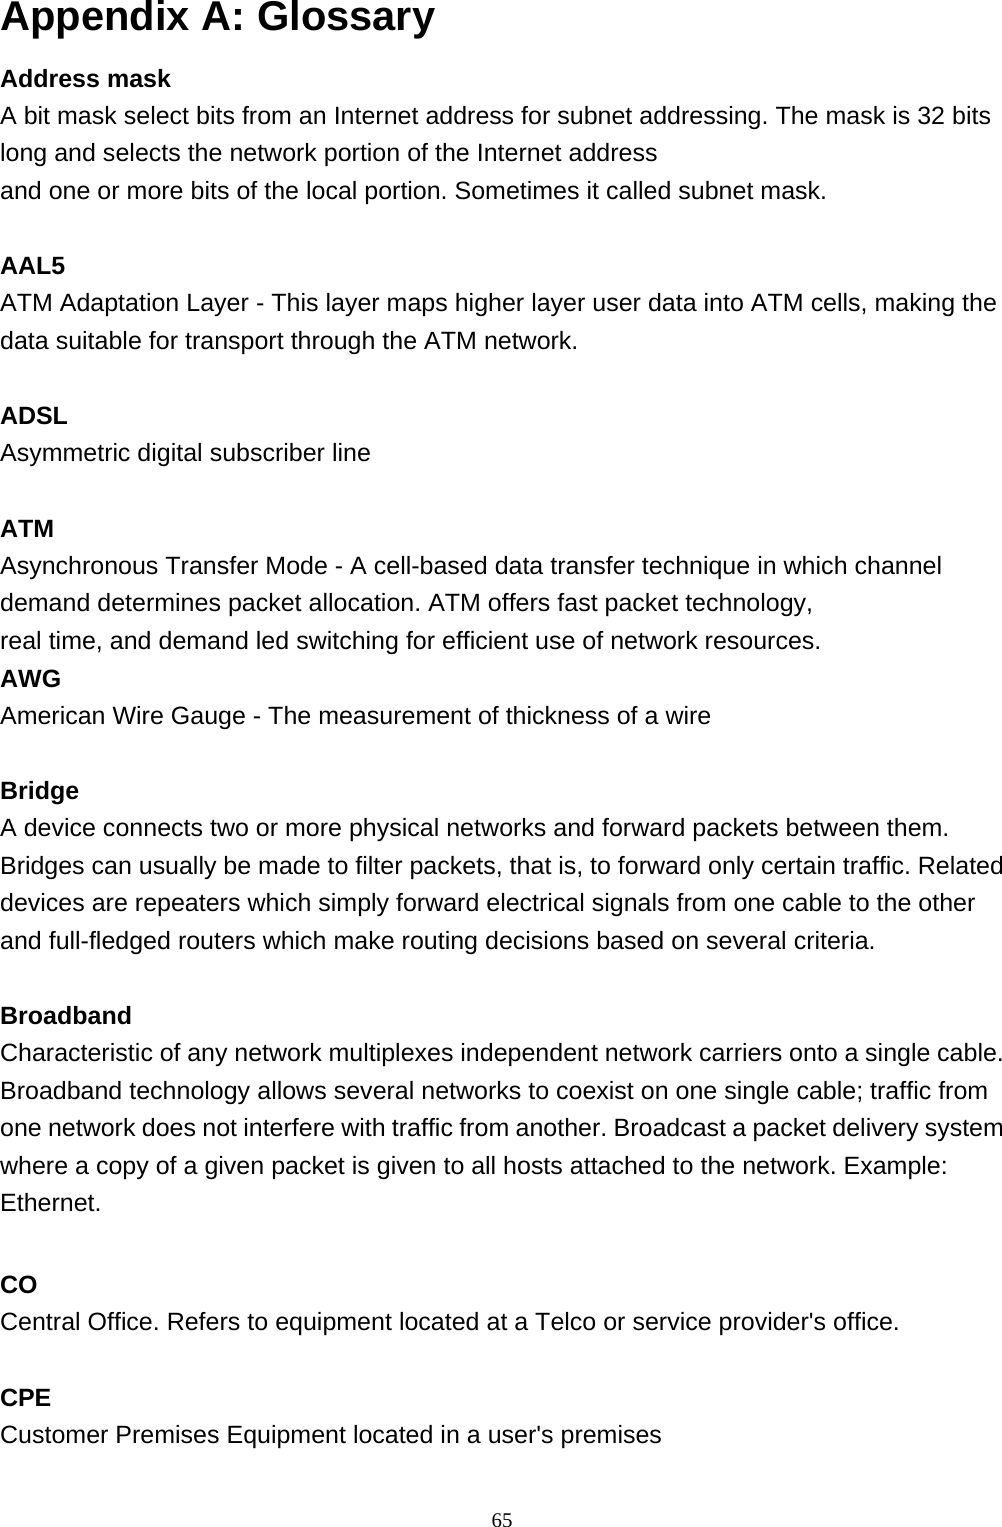 Appendix A: Glossary Address mask A bit mask select bits from an Internet address for subnet addressing. The mask is 32 bits long and selects the network portion of the Internet address  and one or more bits of the local portion. Sometimes it called subnet mask.  AAL5 ATM Adaptation Layer - This layer maps higher layer user data into ATM cells, making the data suitable for transport through the ATM network.  ADSL Asymmetric digital subscriber line  ATM Asynchronous Transfer Mode - A cell-based data transfer technique in which channel demand determines packet allocation. ATM offers fast packet technology,  real time, and demand led switching for efficient use of network resources. AWG American Wire Gauge - The measurement of thickness of a wire  Bridge A device connects two or more physical networks and forward packets between them. Bridges can usually be made to filter packets, that is, to forward only certain traffic. Related devices are repeaters which simply forward electrical signals from one cable to the other and full-fledged routers which make routing decisions based on several criteria.  Broadband Characteristic of any network multiplexes independent network carriers onto a single cable. Broadband technology allows several networks to coexist on one single cable; traffic from one network does not interfere with traffic from another. Broadcast a packet delivery system where a copy of a given packet is given to all hosts attached to the network. Example: Ethernet.  CO Central Office. Refers to equipment located at a Telco or service provider&apos;s office.  CPE Customer Premises Equipment located in a user&apos;s premises   65 